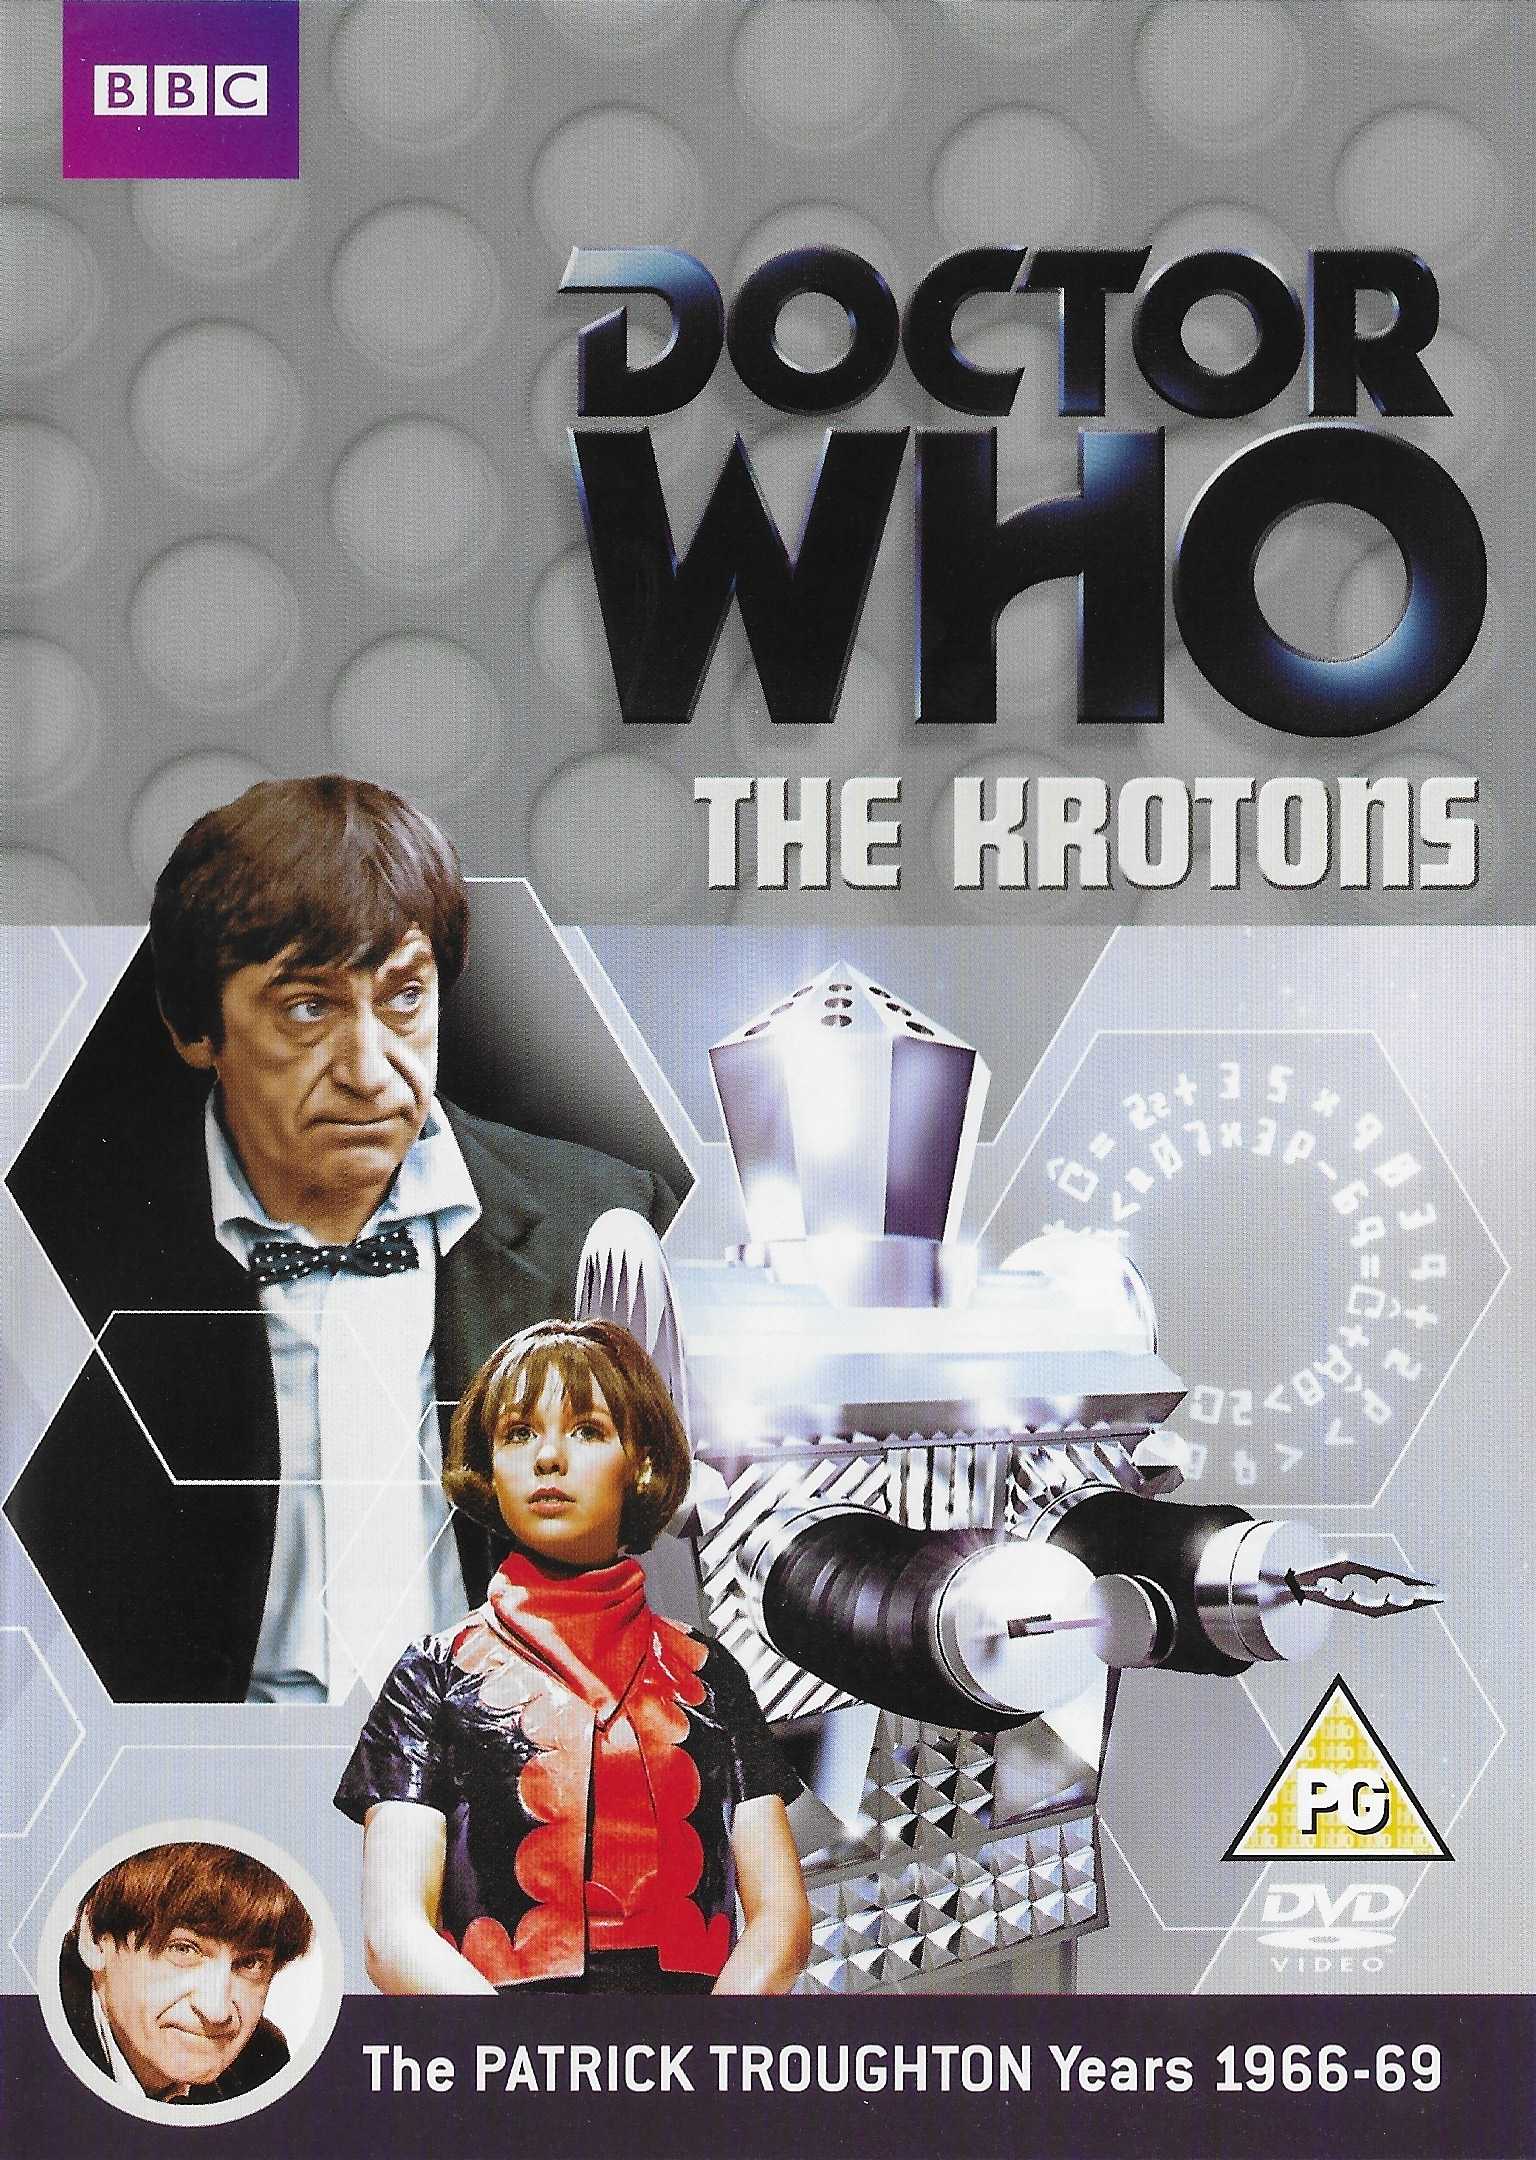 Picture of BBCDVD 3480 Doctor Who - The Krotons by artist Robert Holmes from the BBC dvds - Records and Tapes library